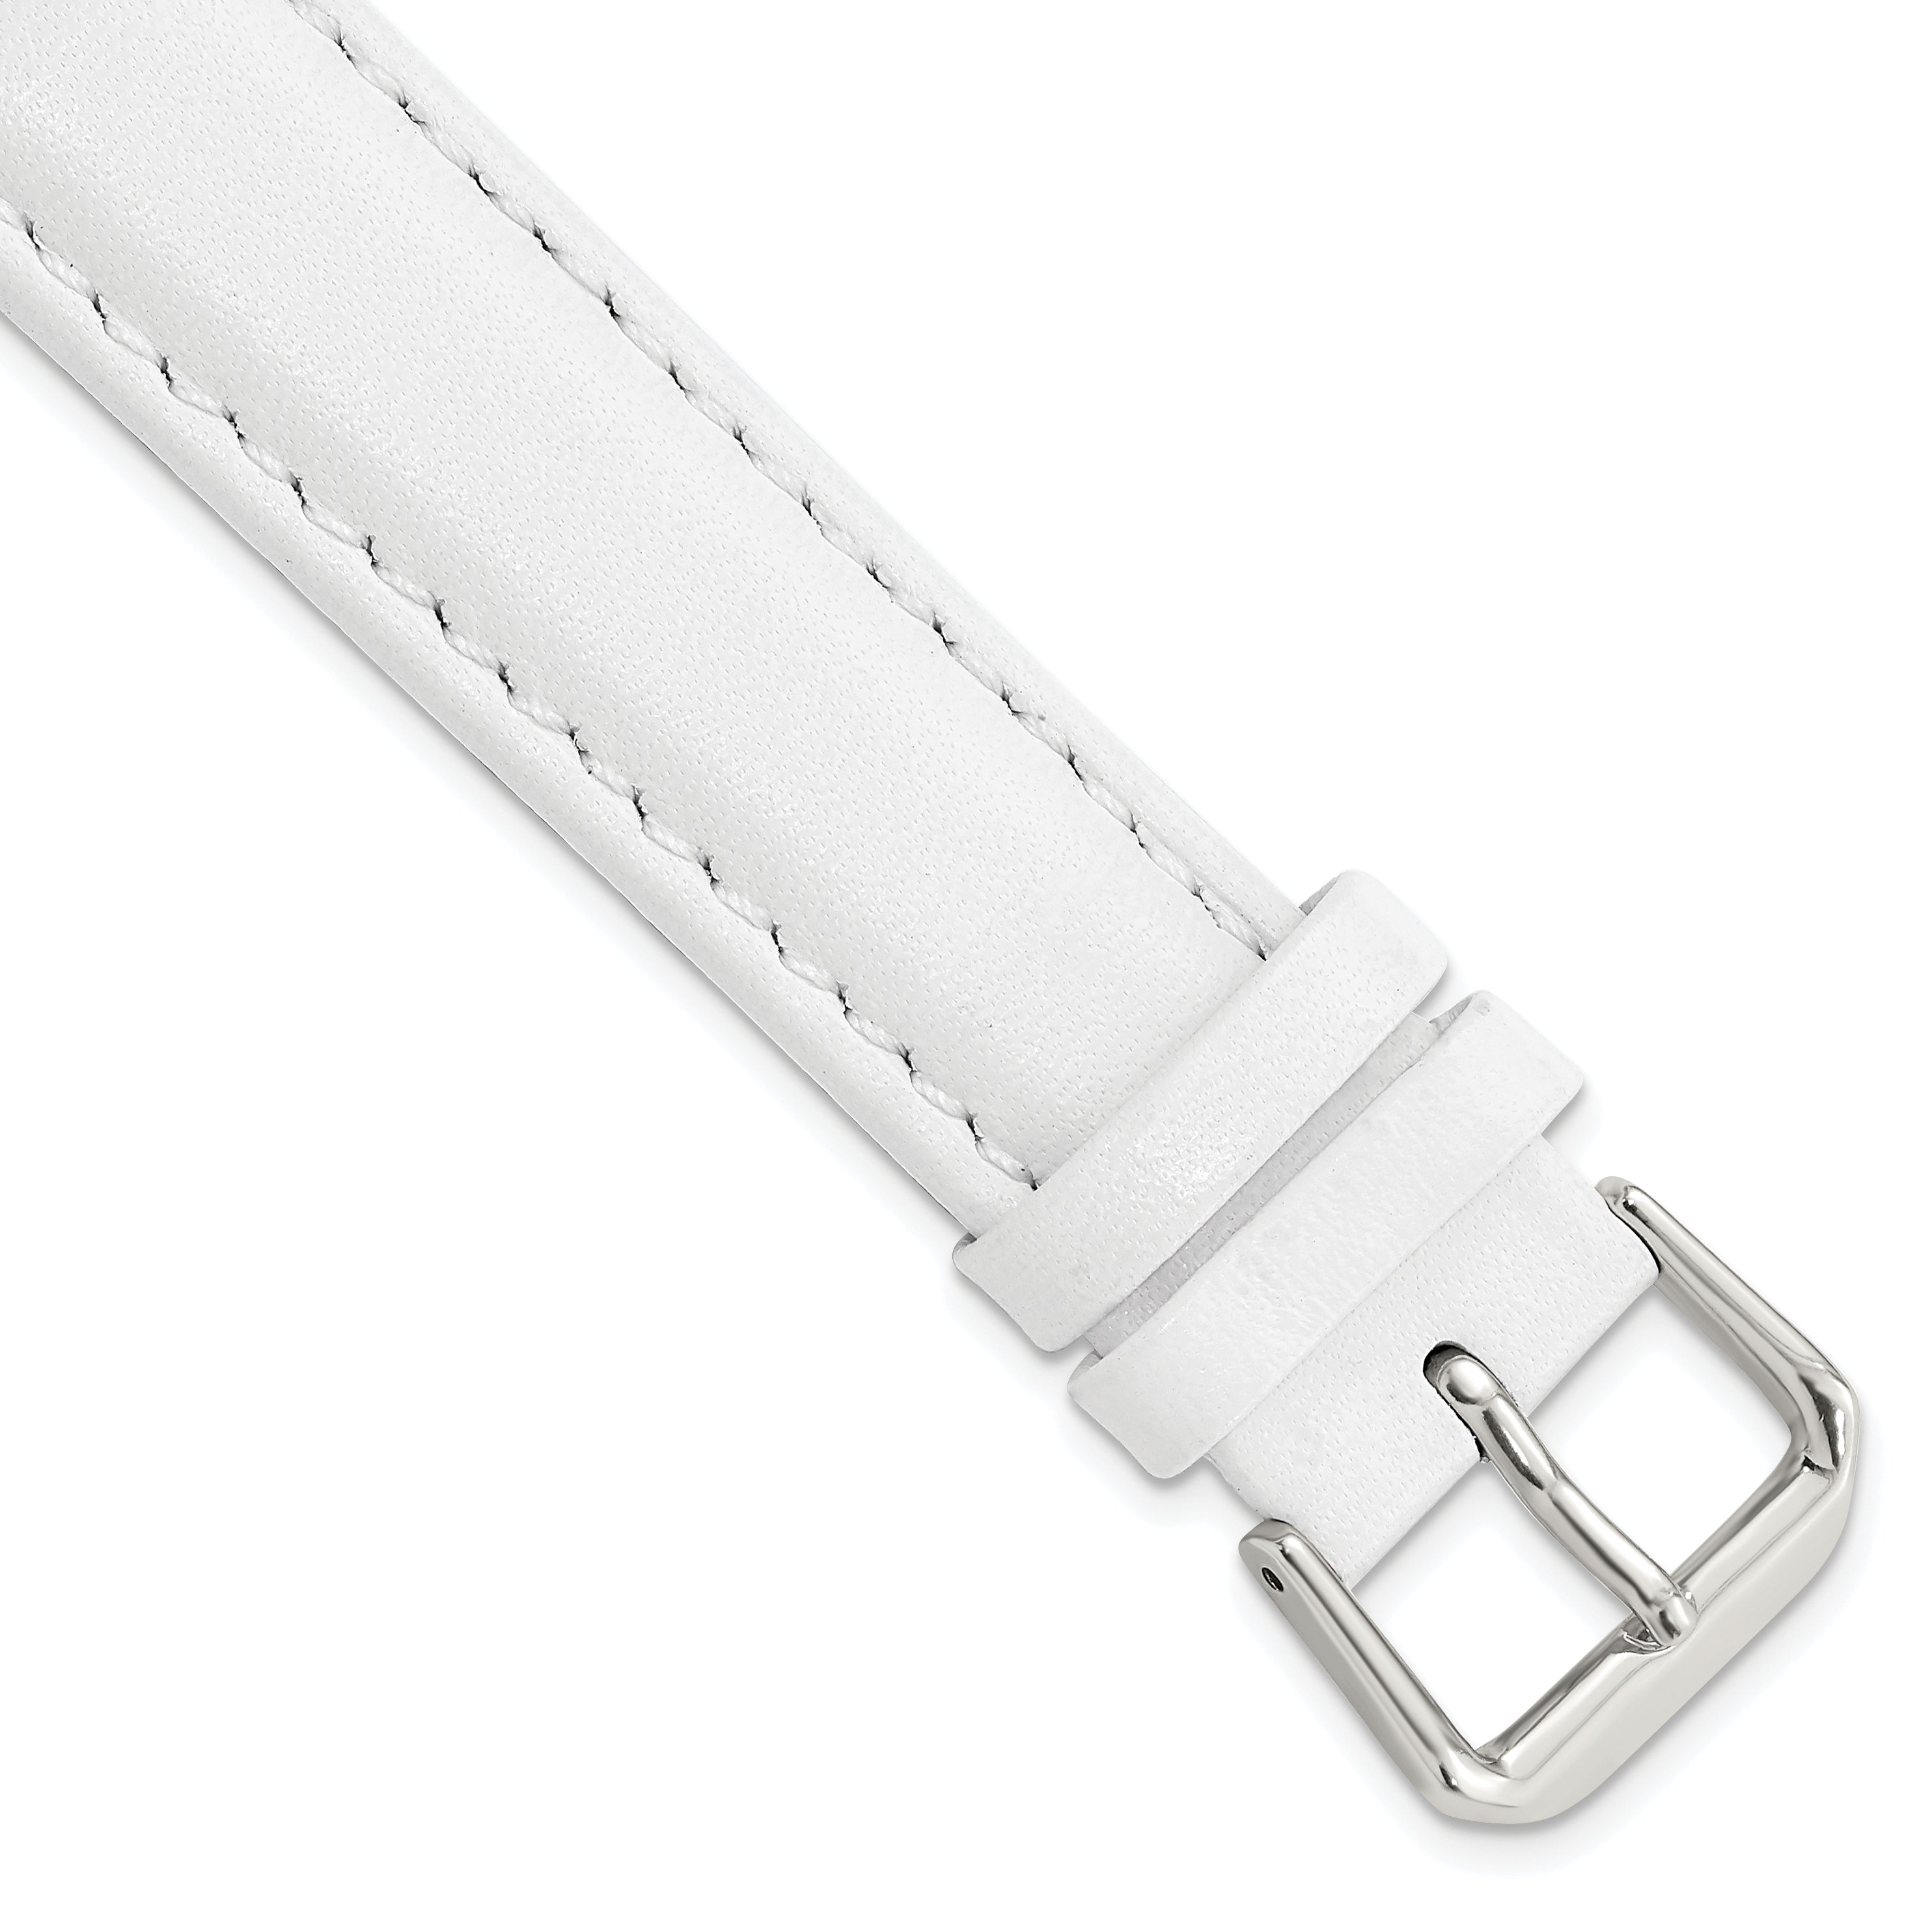 DeBeer 17mm White Smooth Leather with Silver-tone Buckle 7.5 inch Watch Band